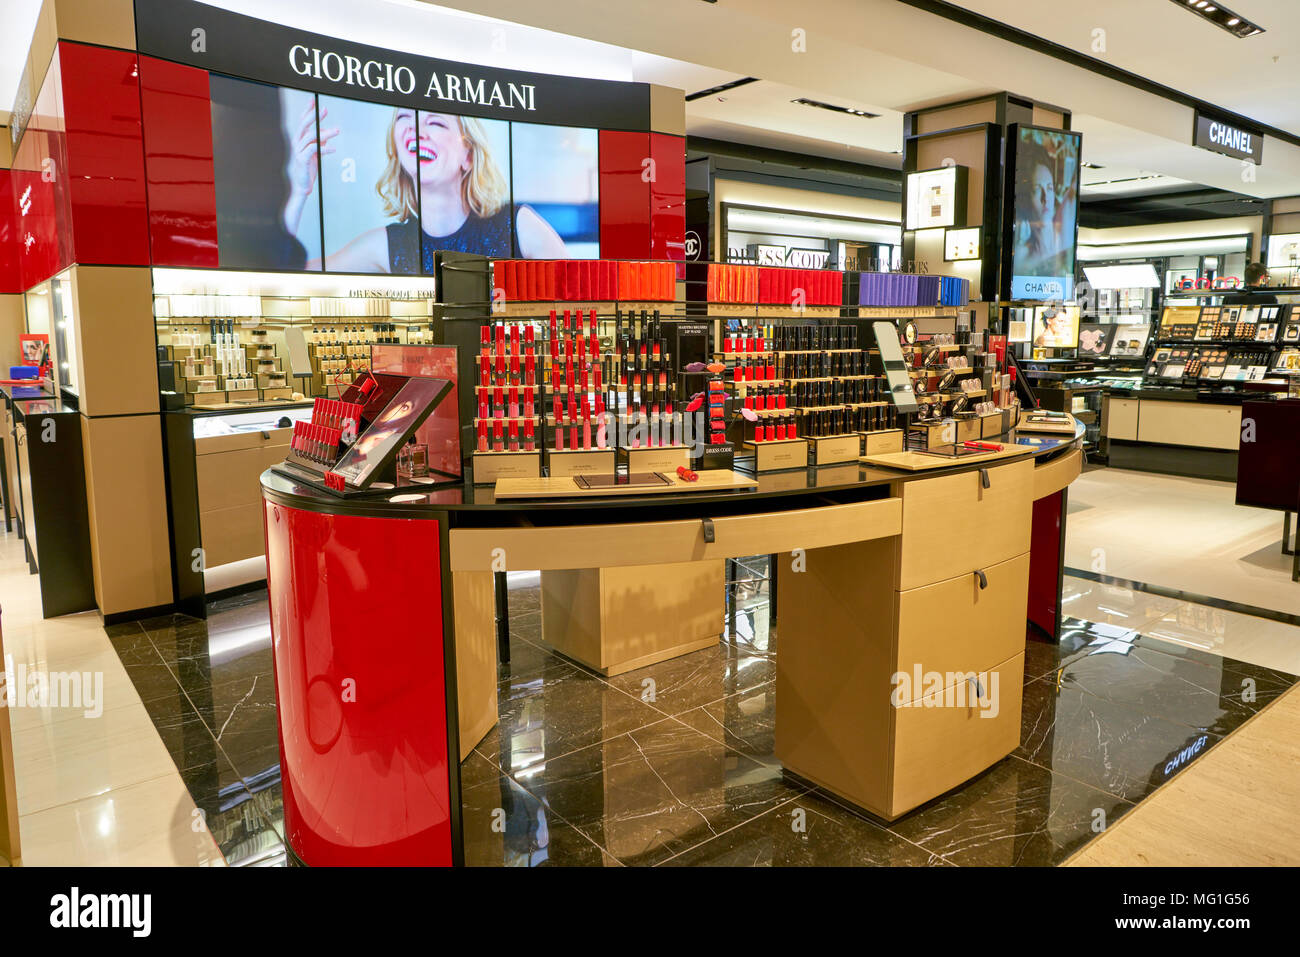 Milan - September 24, 2017: Giorgio Armani Store In Milan Stock Photo,  Picture and Royalty Free Image. Image 93825237.